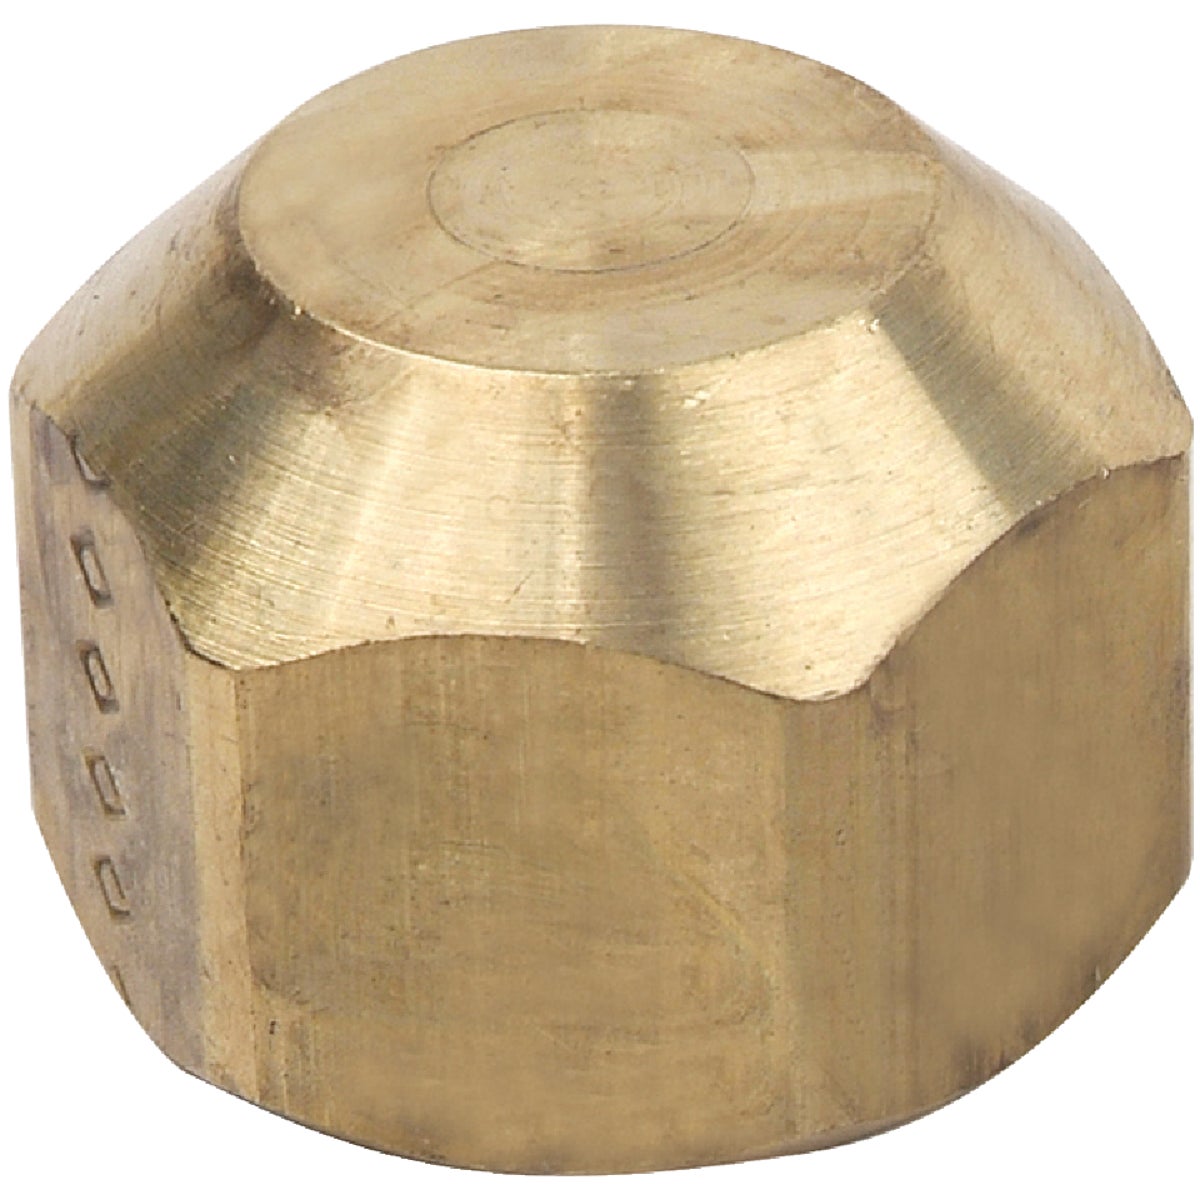 Item 400826, This safety cap is designed for use with CSA approved flare fittings and 